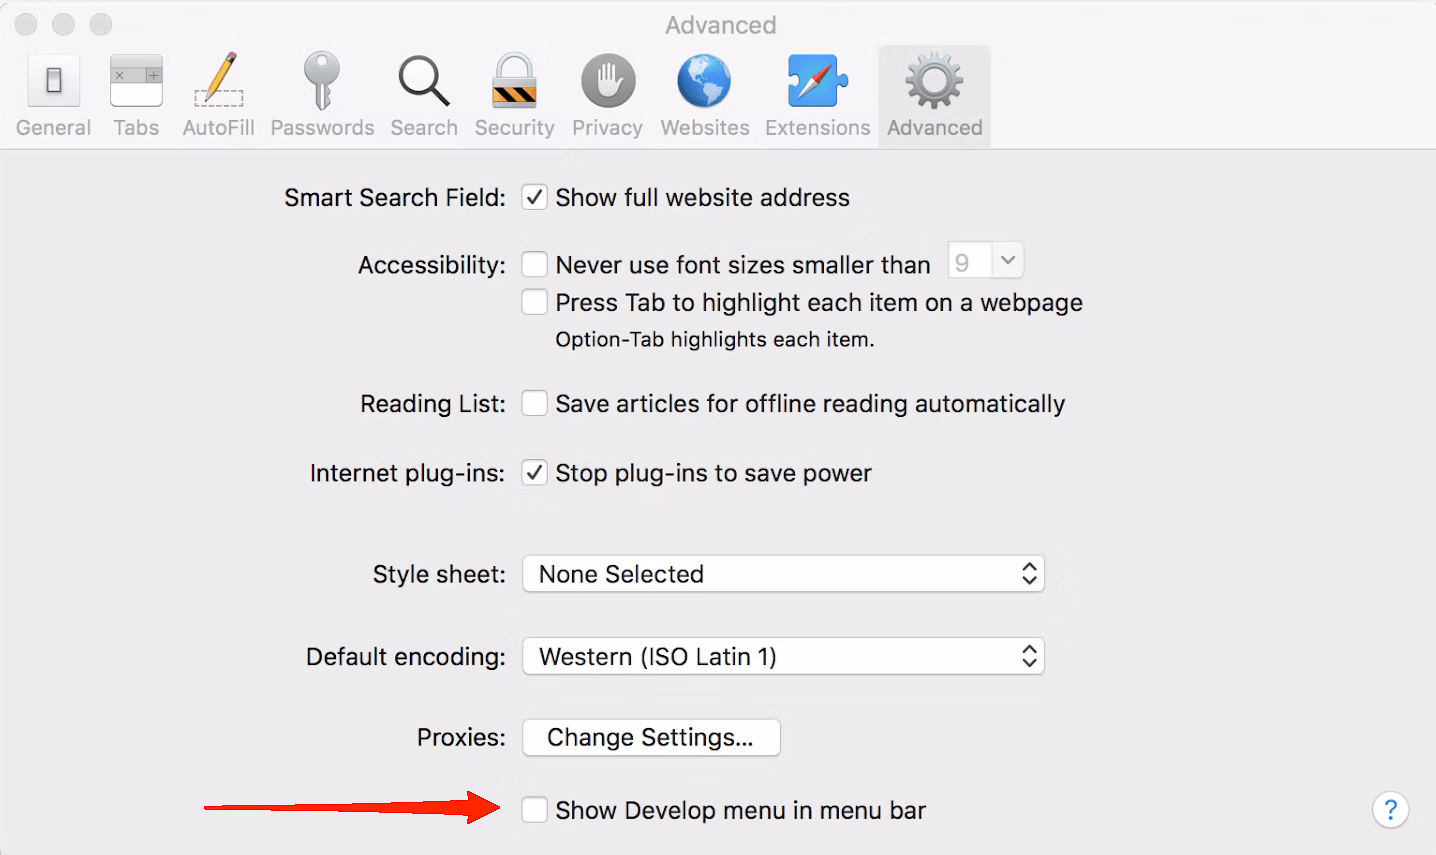 Now, click on the Advanced tab and check the "Show Develop menu in the menu bar" at the bottom.